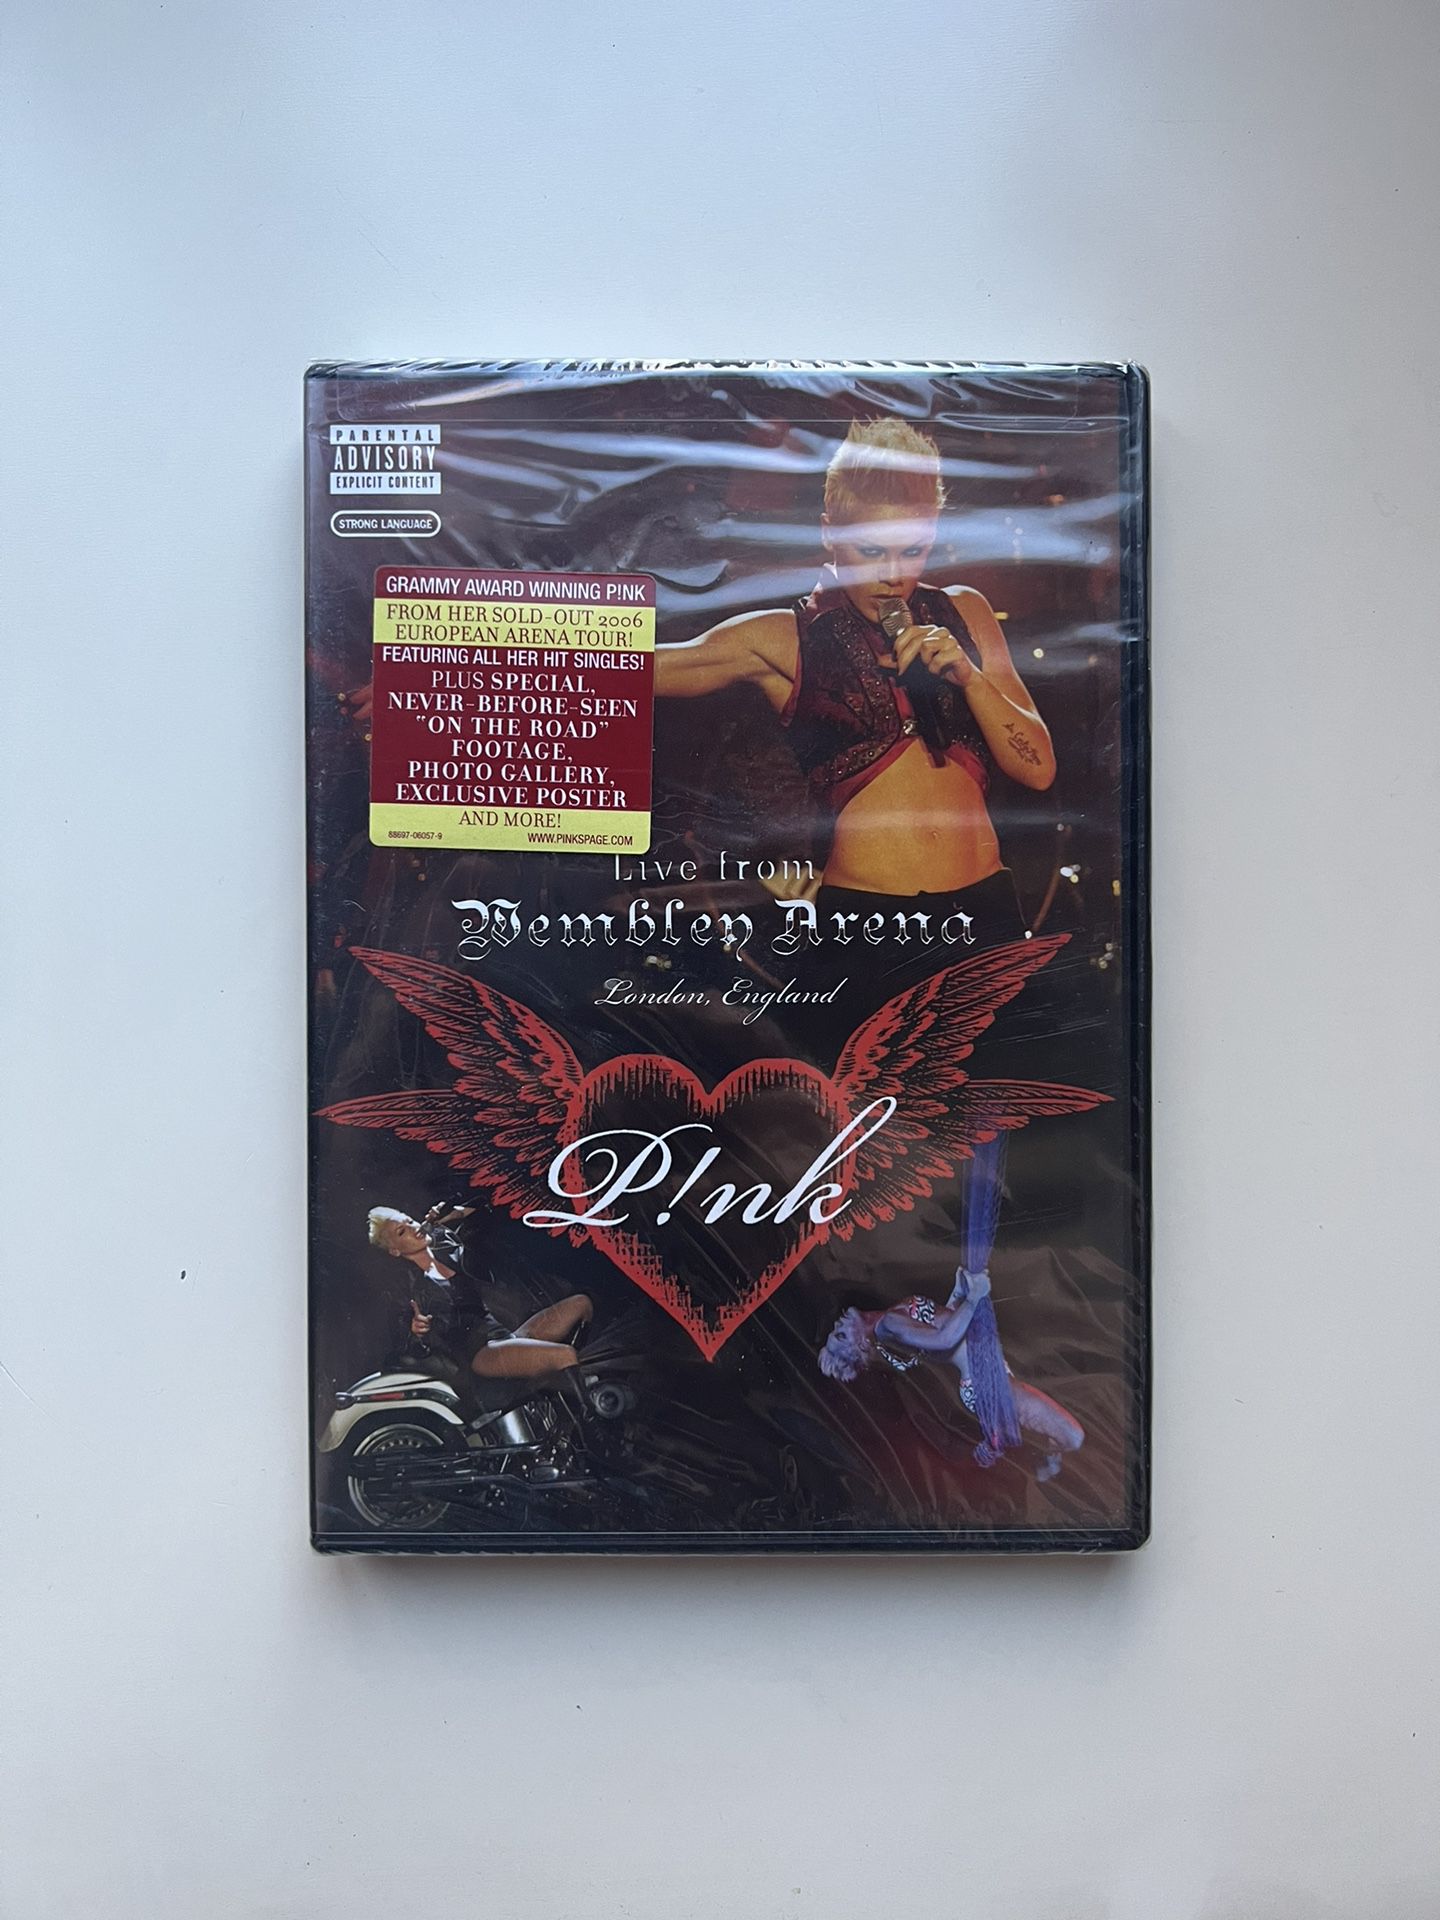 P!nk Pink Live From Wembley Arena London England Music Concert DVD 2007 Sealed